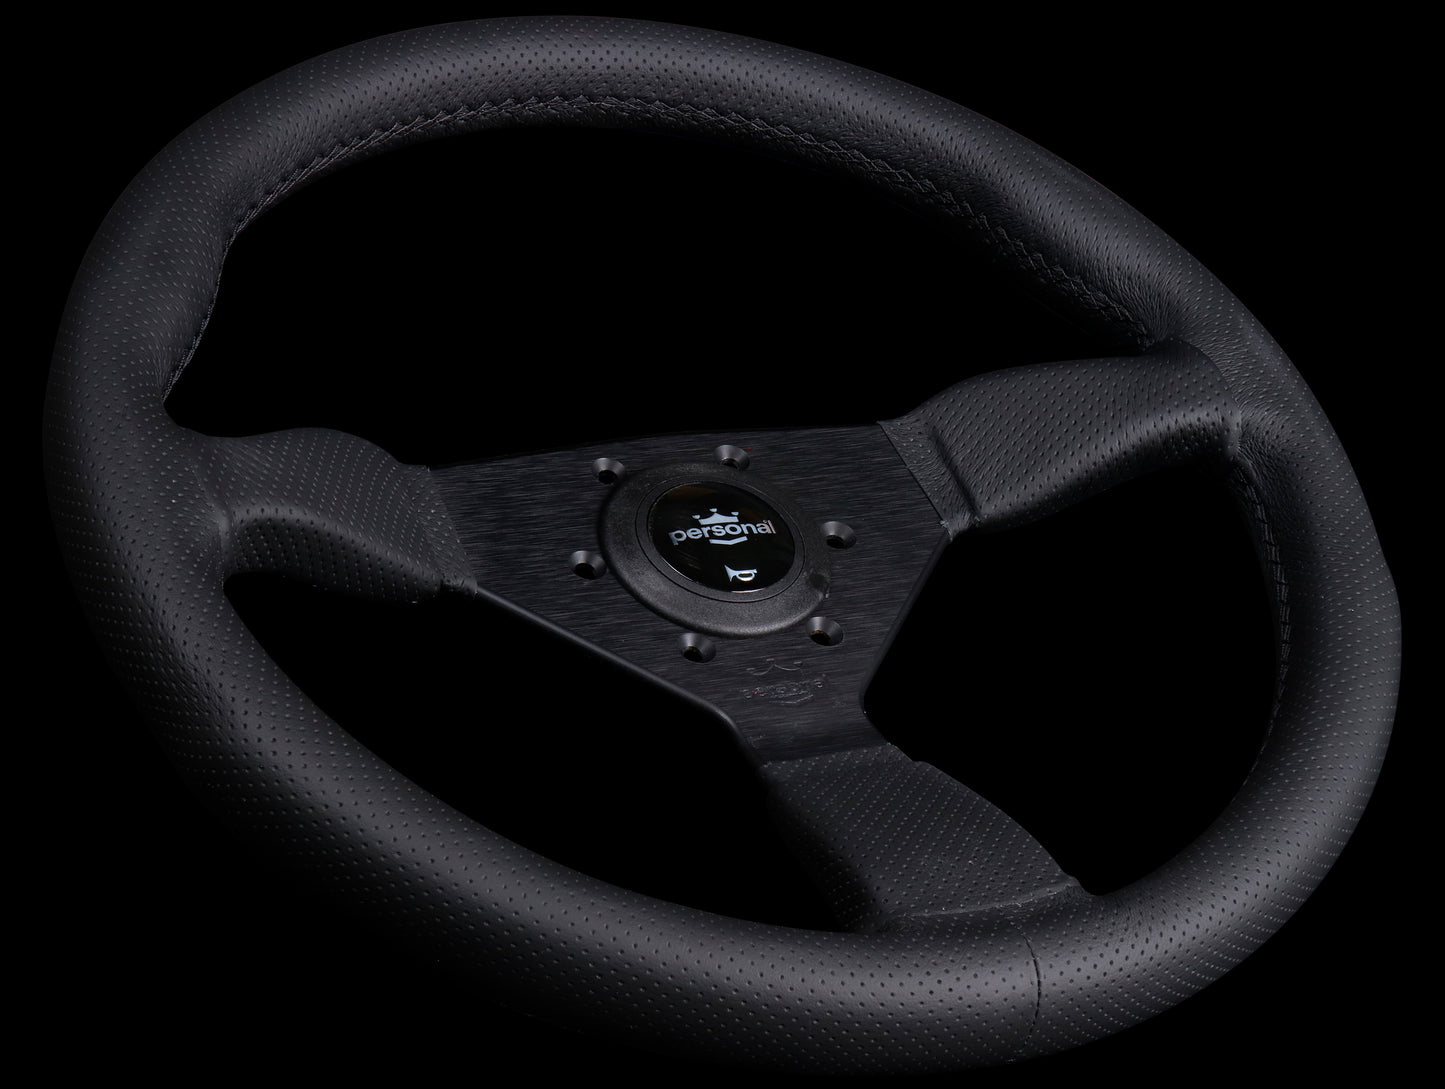 Personal Grinta 350mm Steering Wheel - Black Edition / Perforated Leather